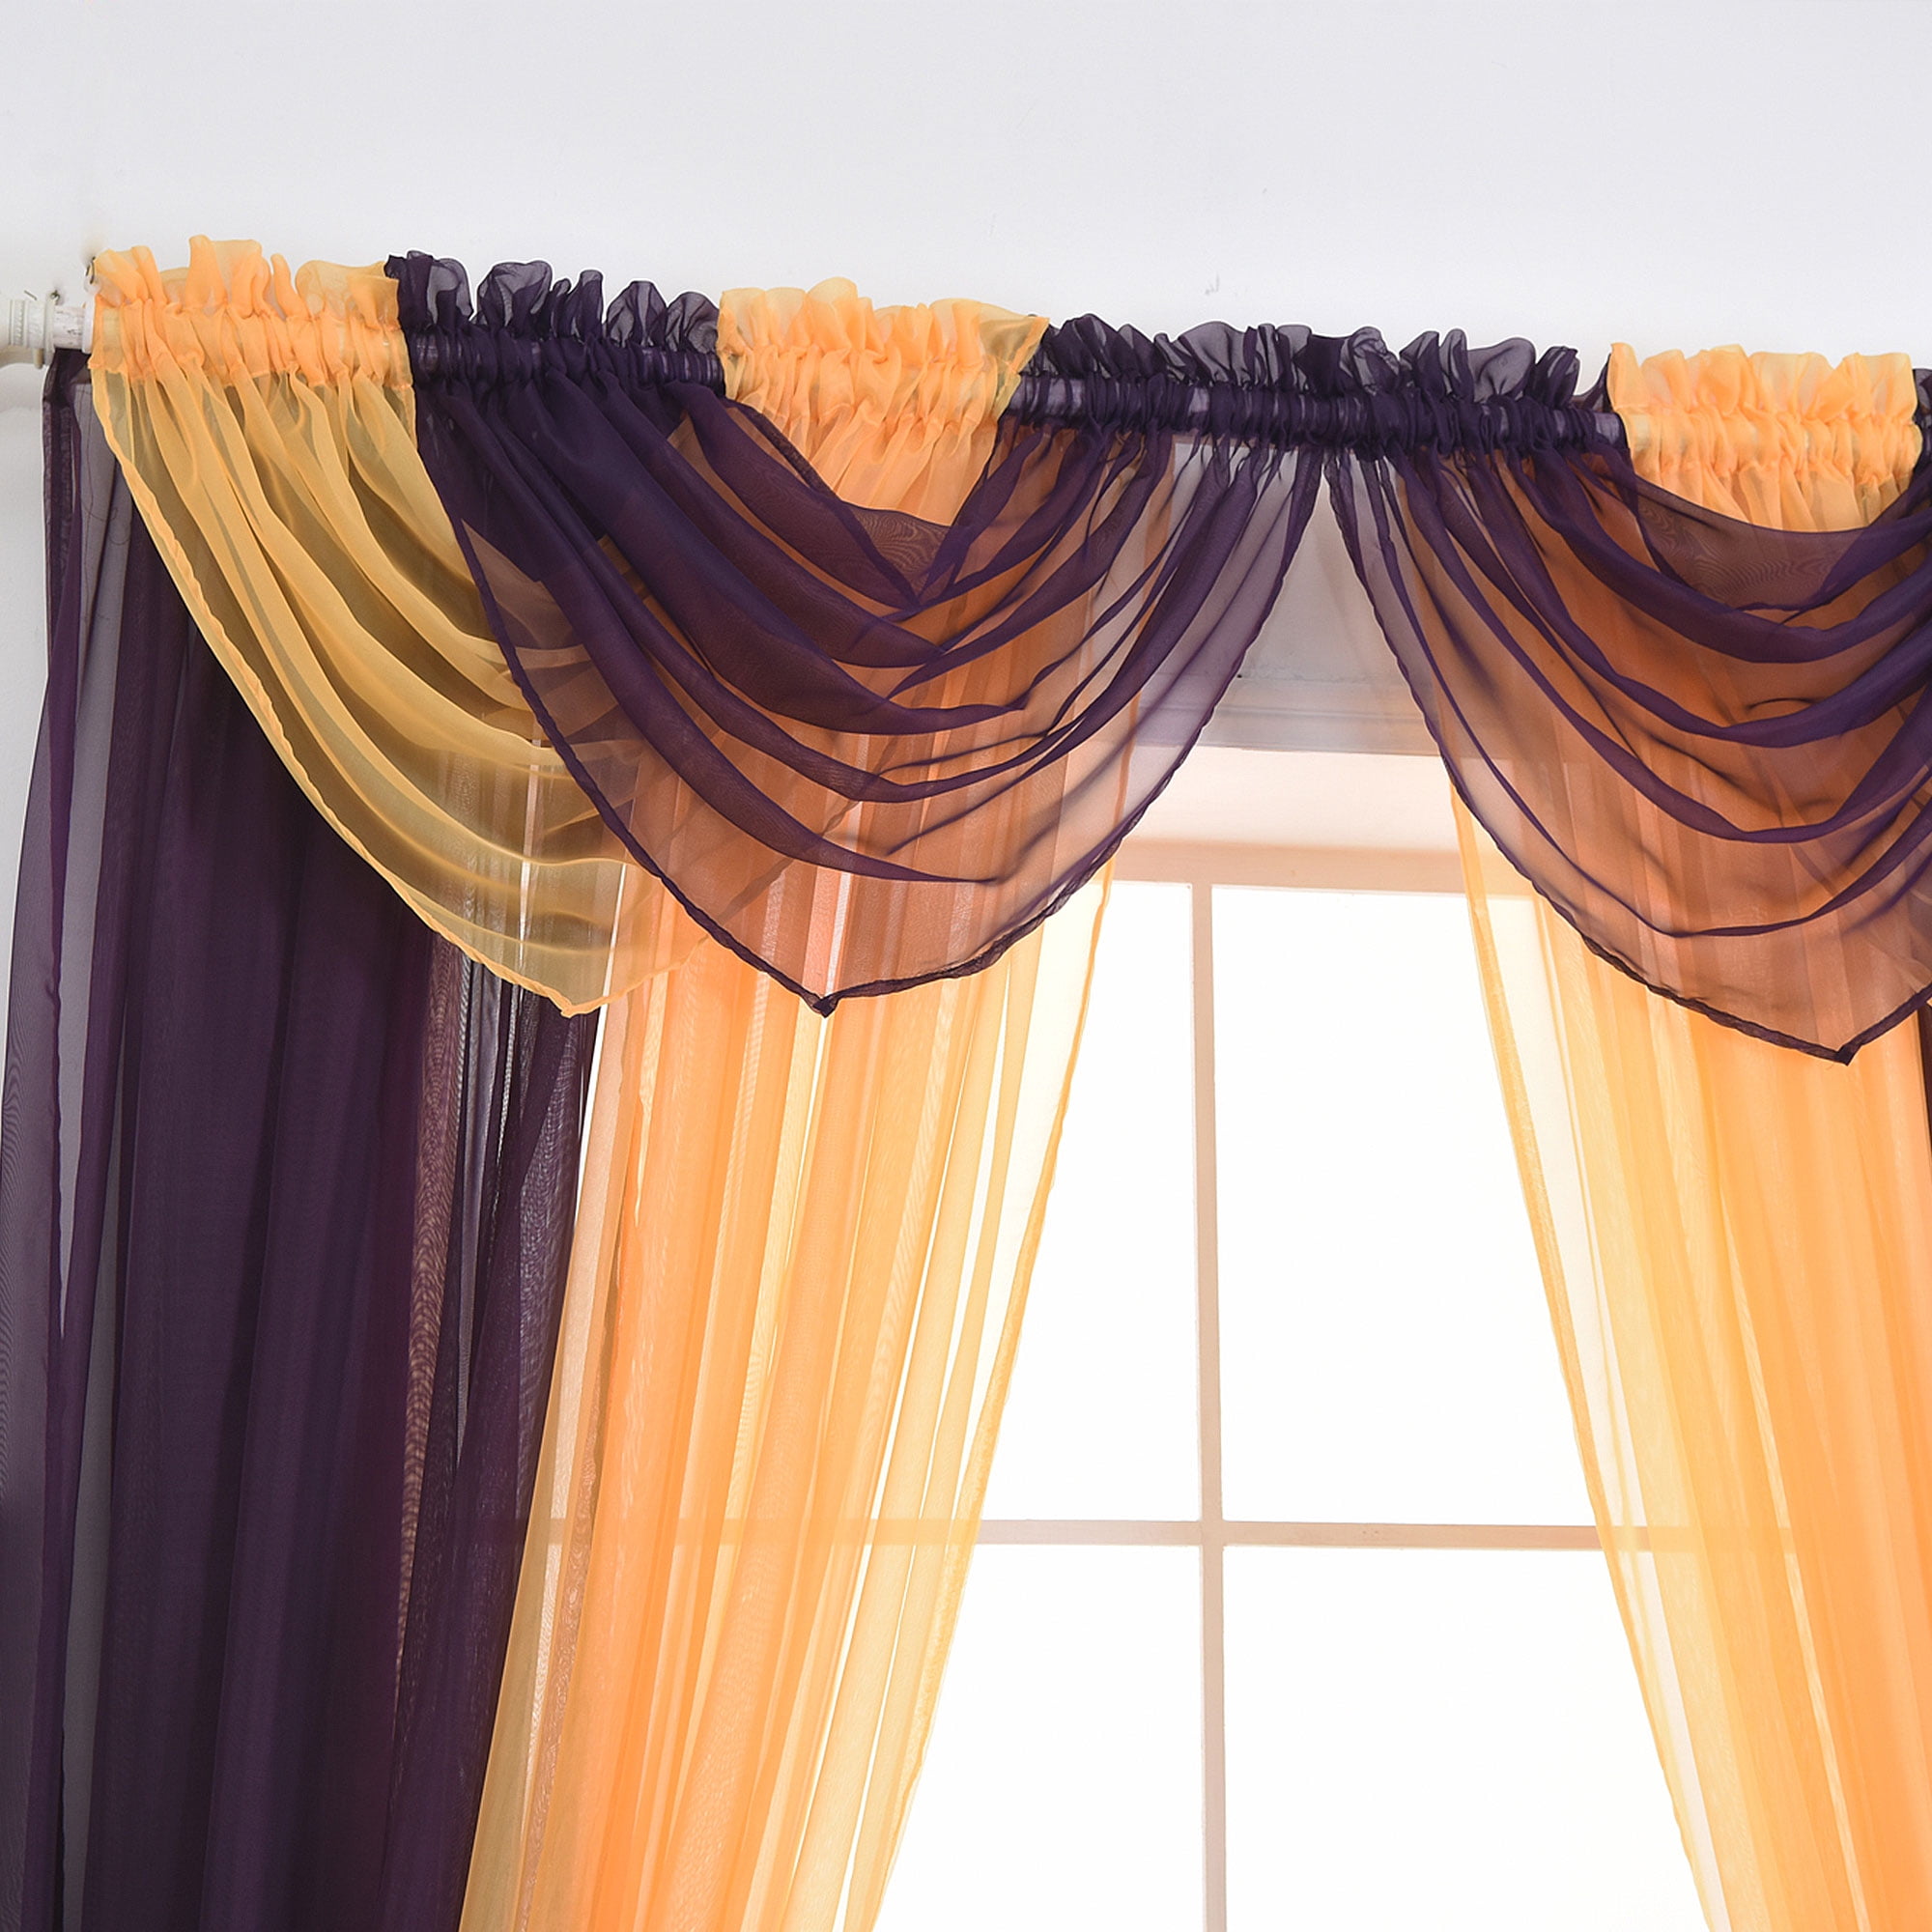 STUNNING PLAIN COLOURS SOFT FOLD VOILE NET CURTAIN SWAG WITH TASSEL £3.49 EACH 